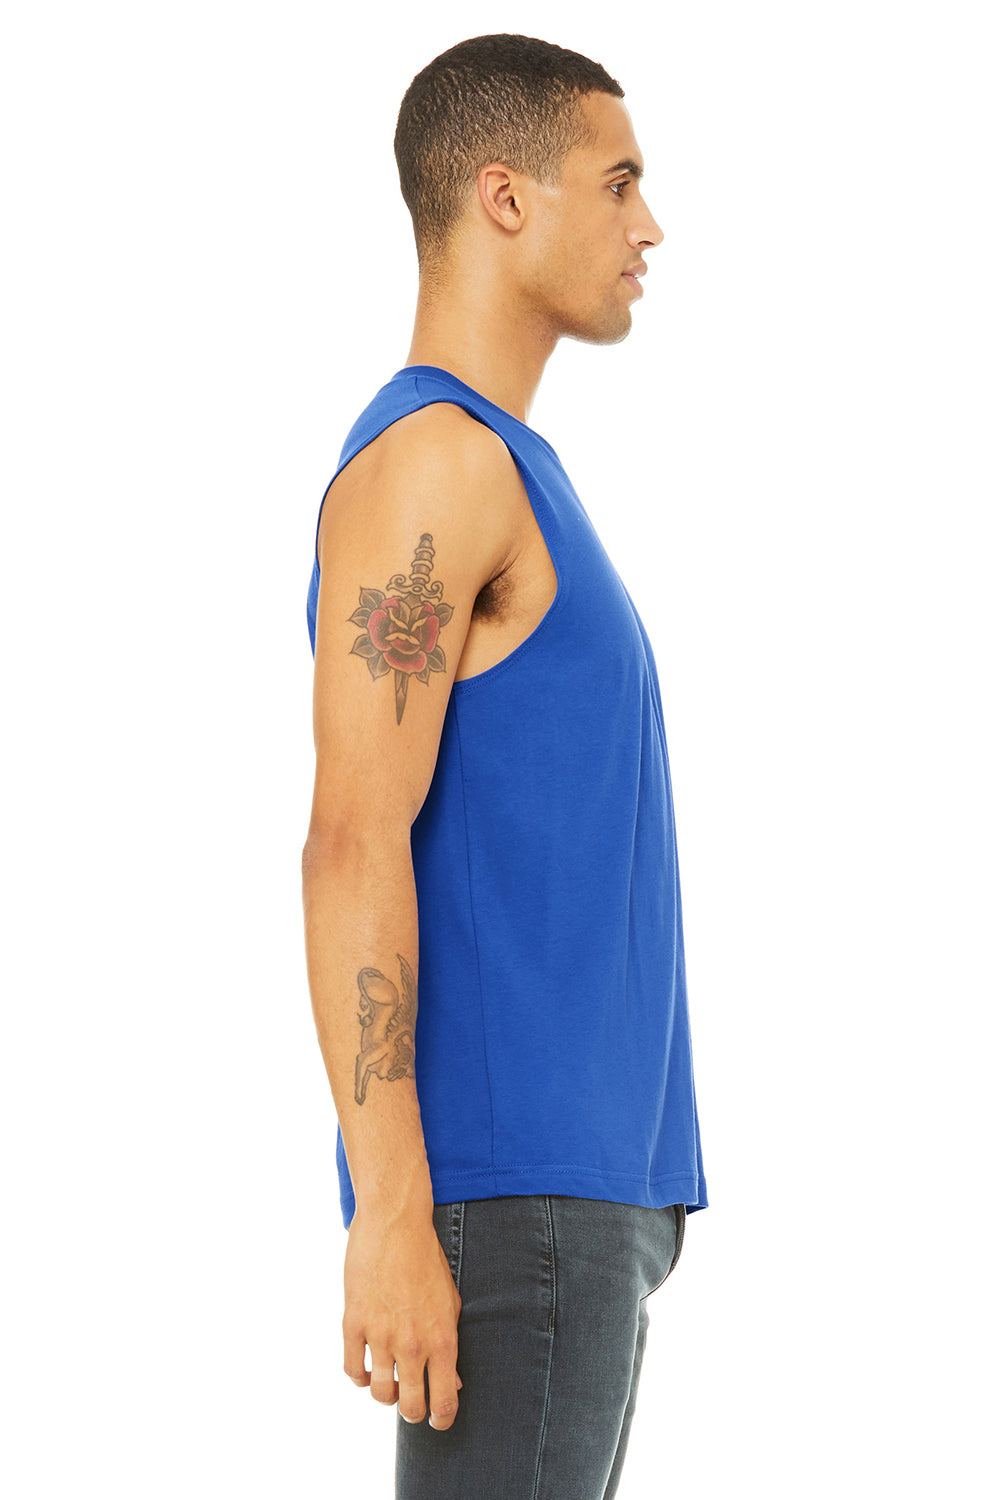 Bella + Canvas 3483 Mens Jersey Muscle Tank Top Royal Blue Side